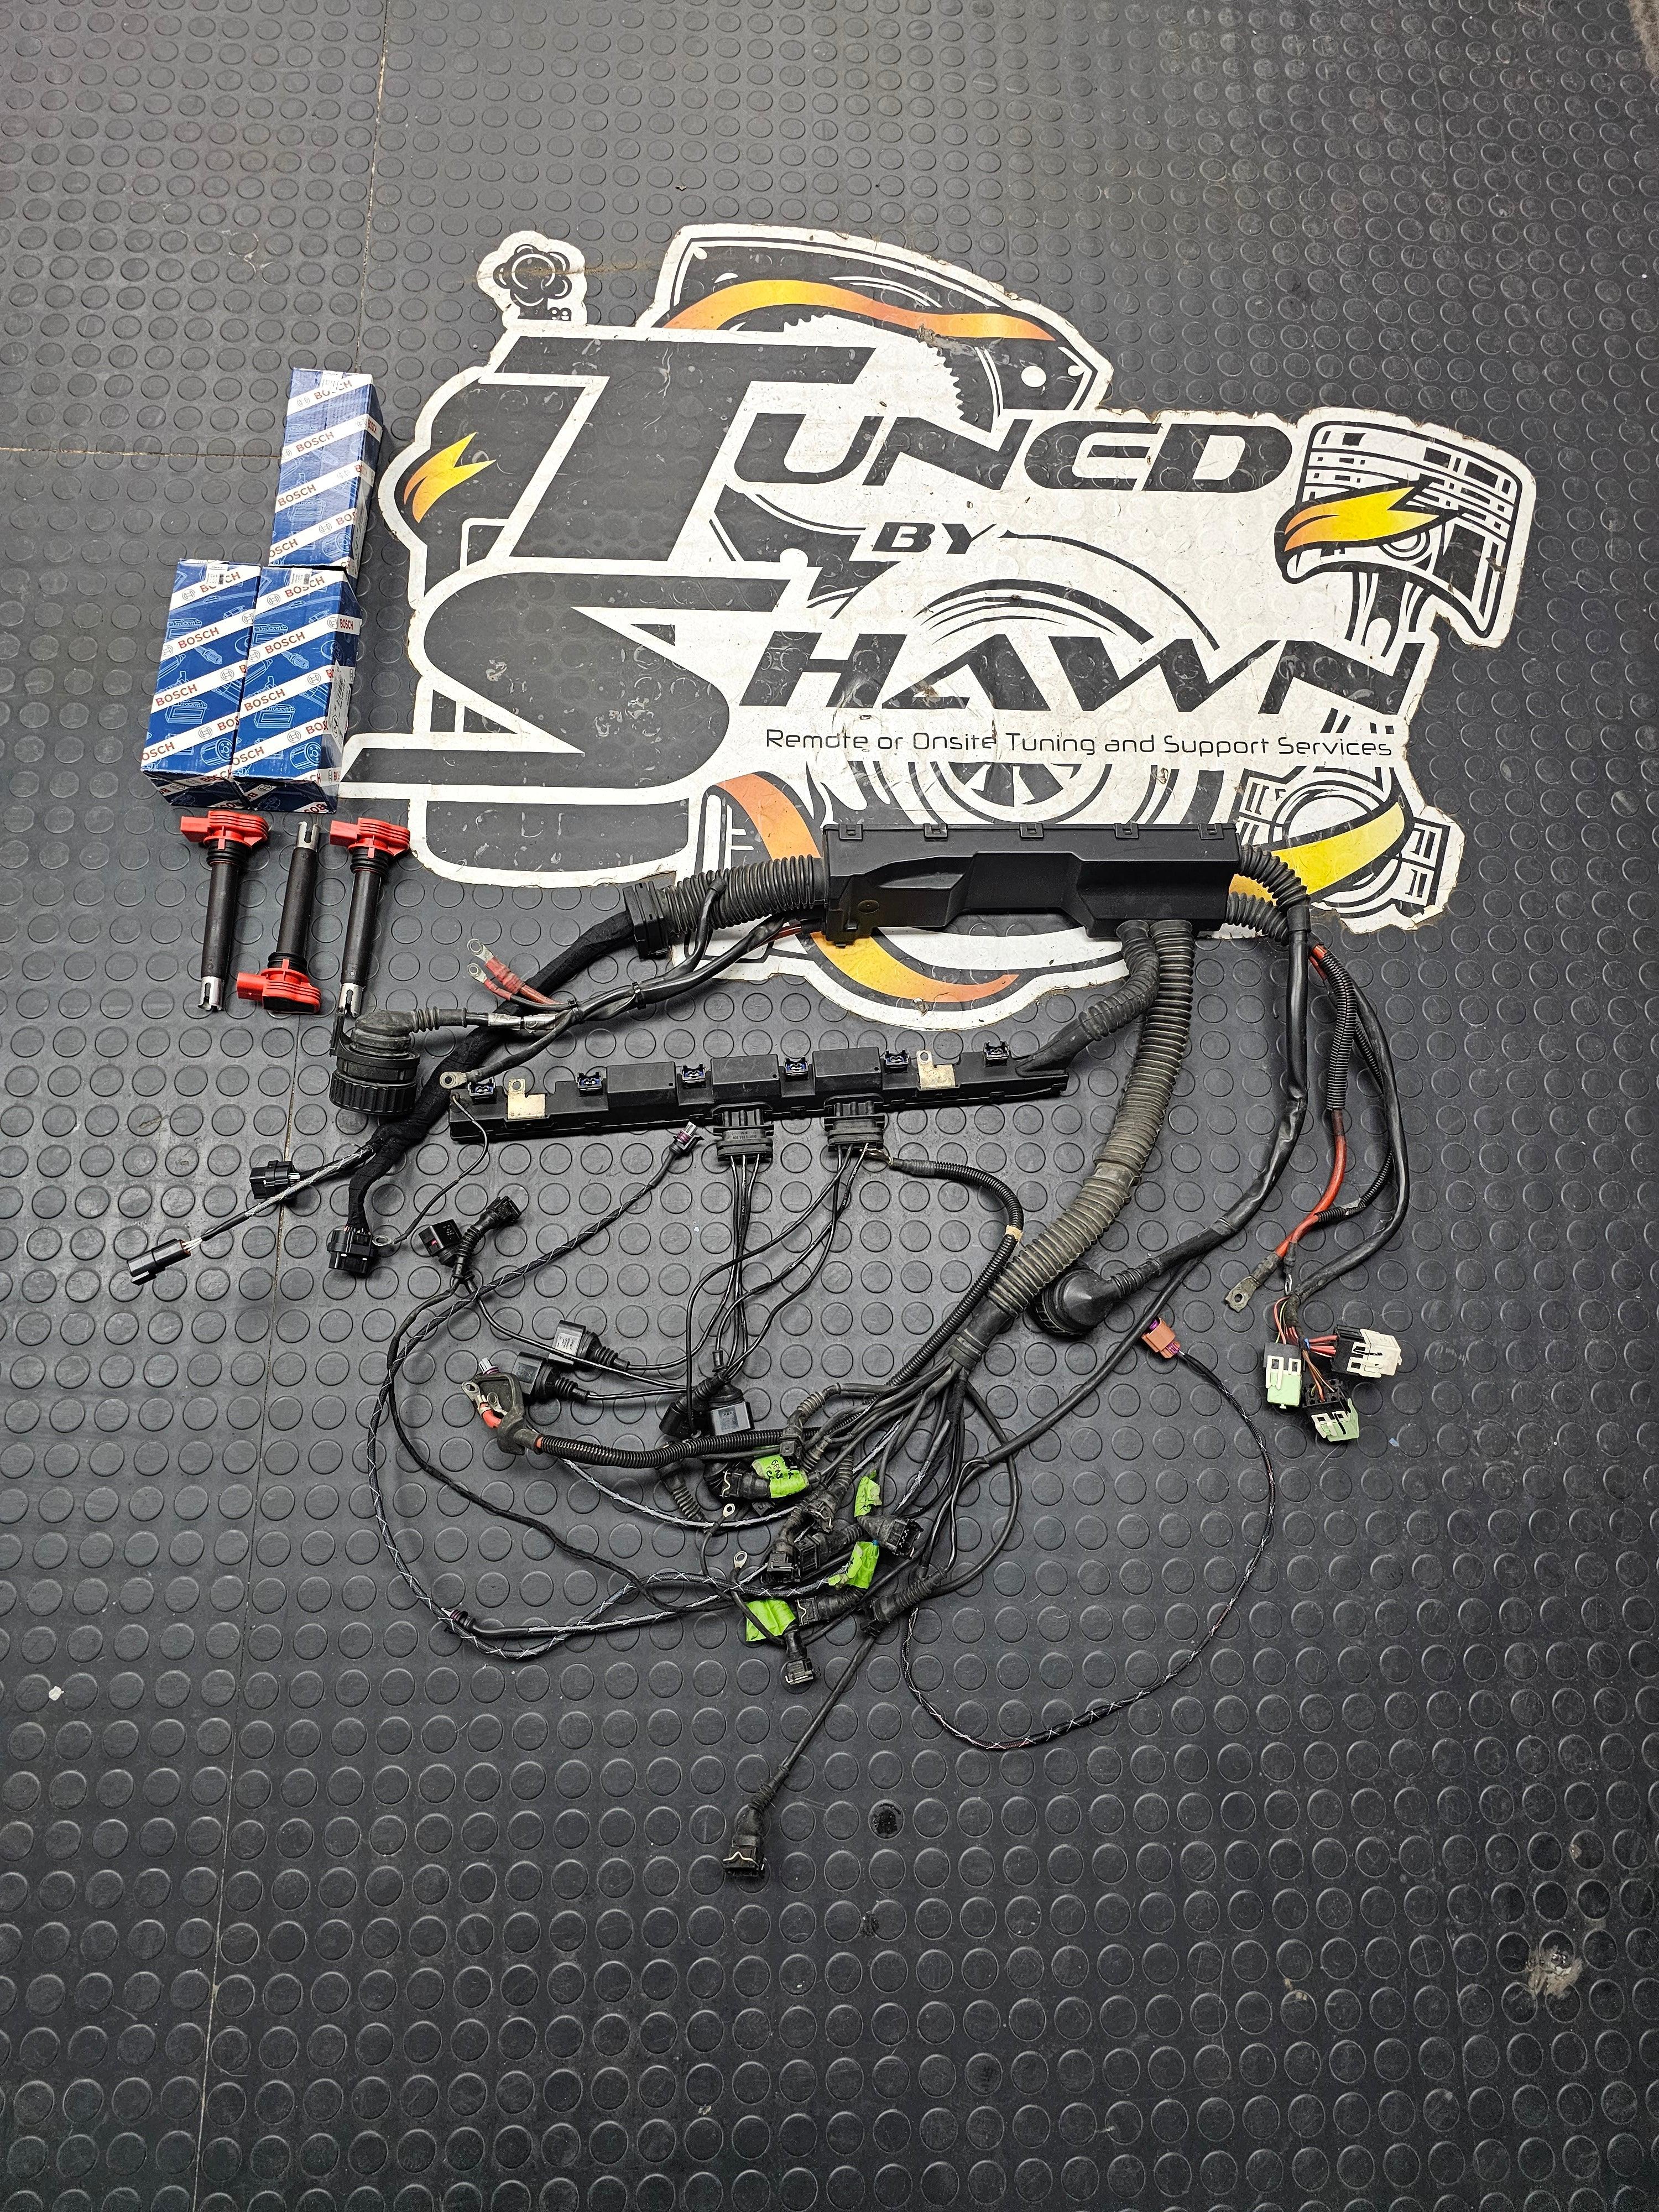 Haltech - BMW E36 OBD1 - HARNESS CONVERSION from Tuned By Shawn